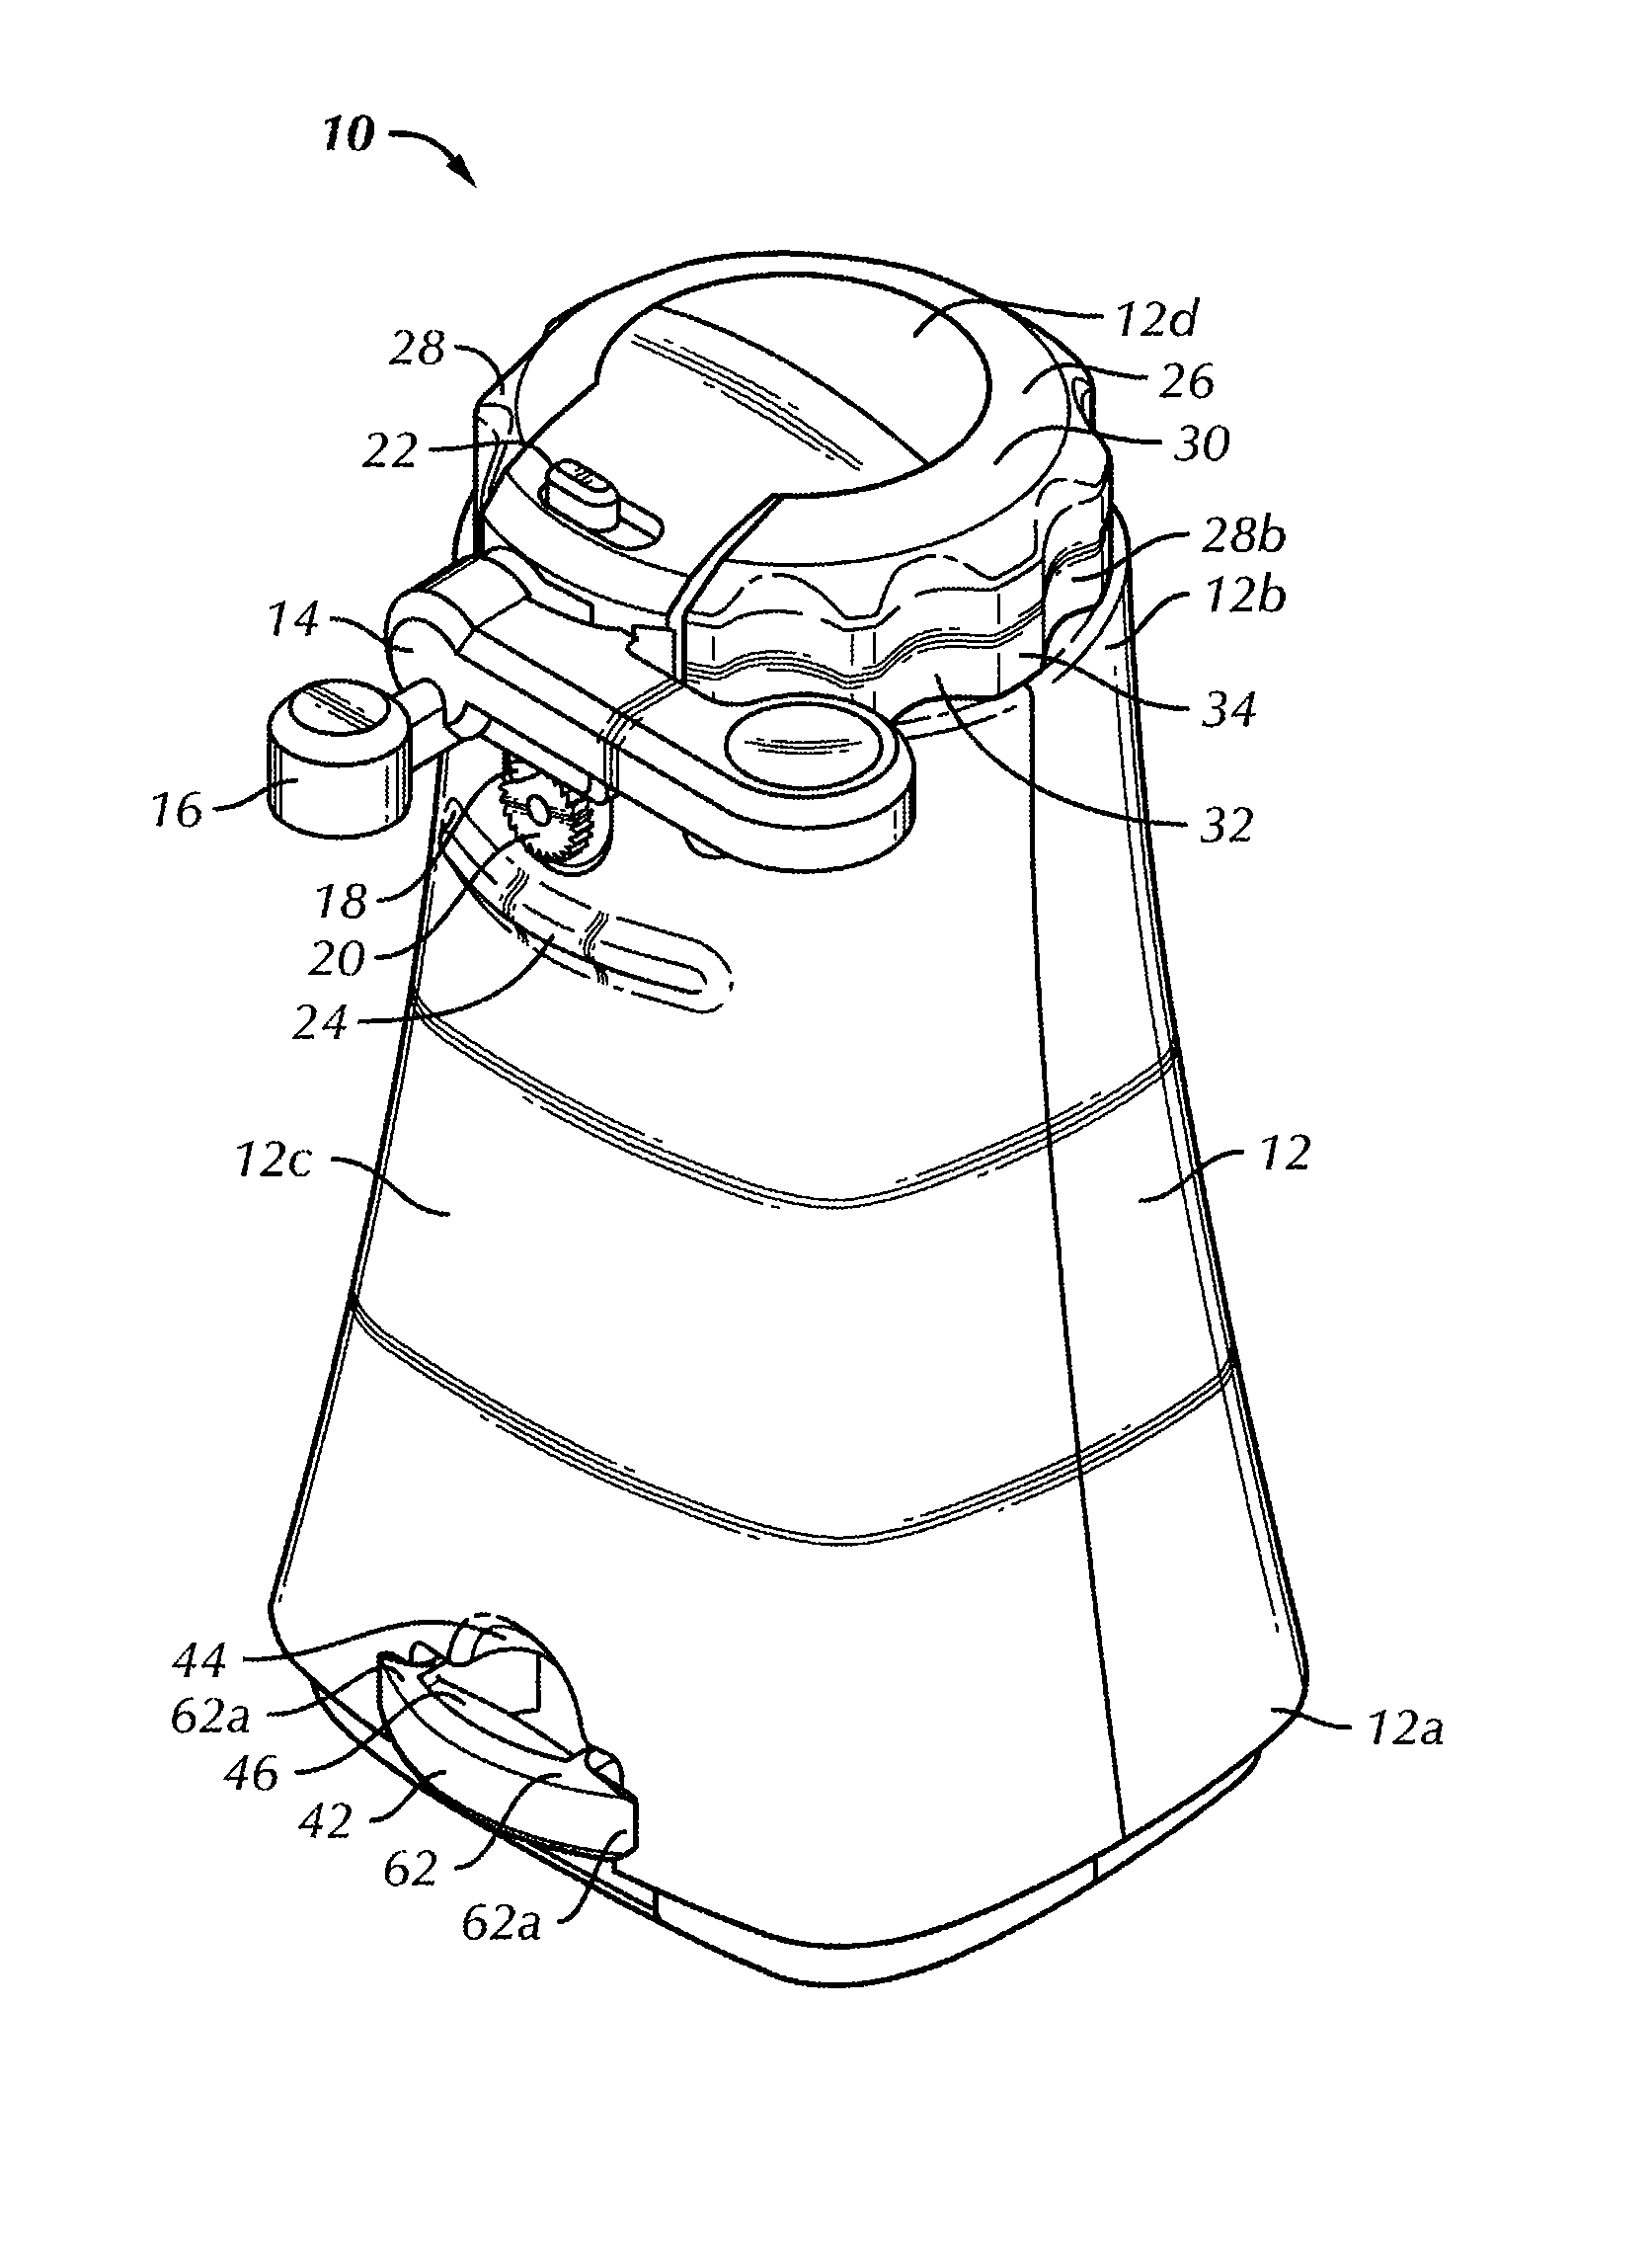 Electric can opener having removable opener tools